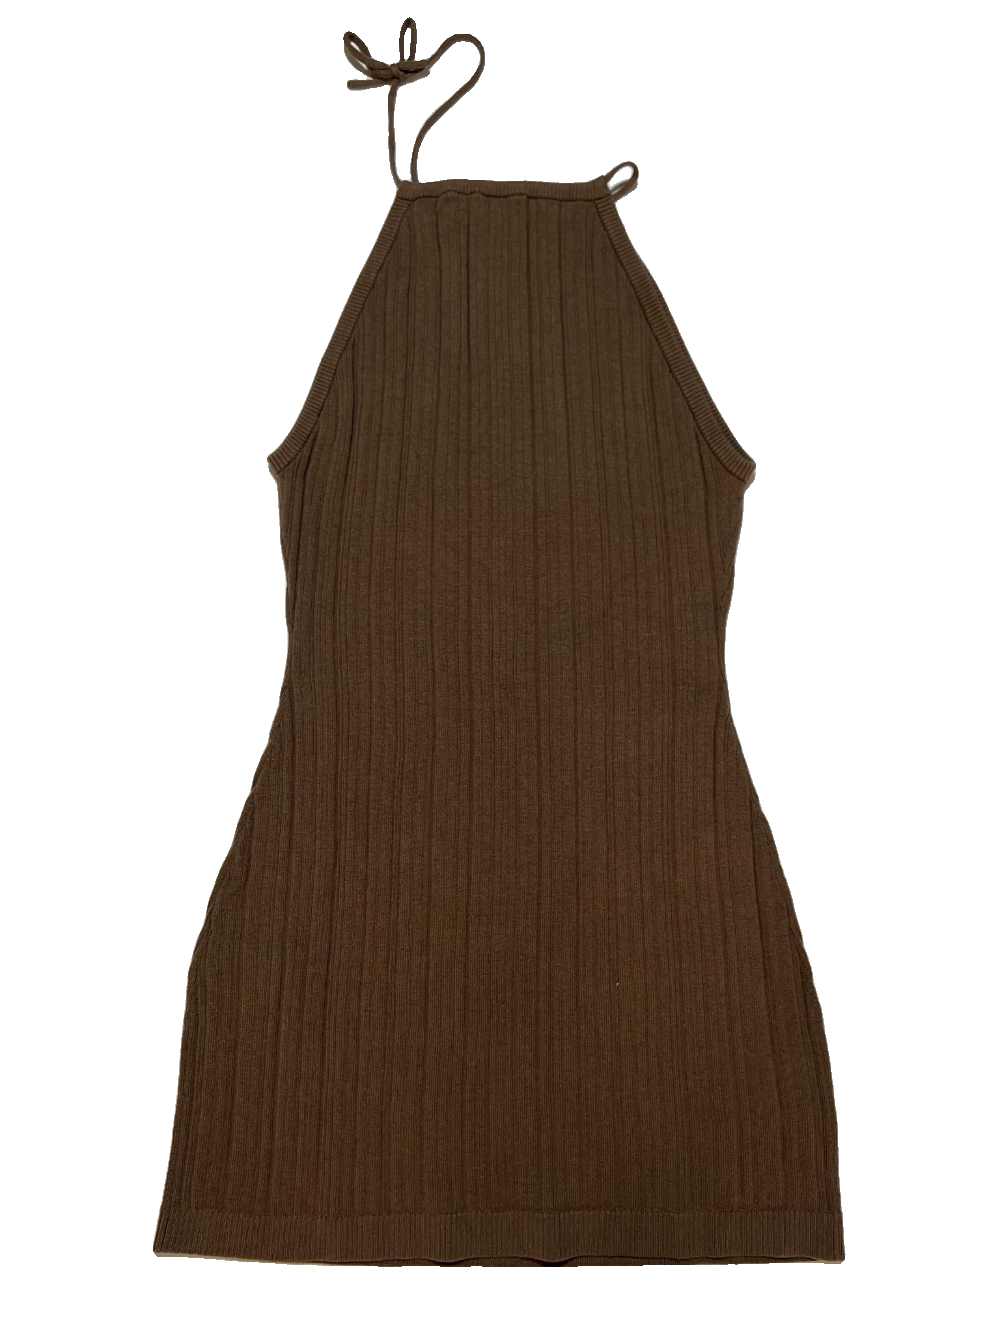 & Other Stories- Brown Ribbed Mini Dress